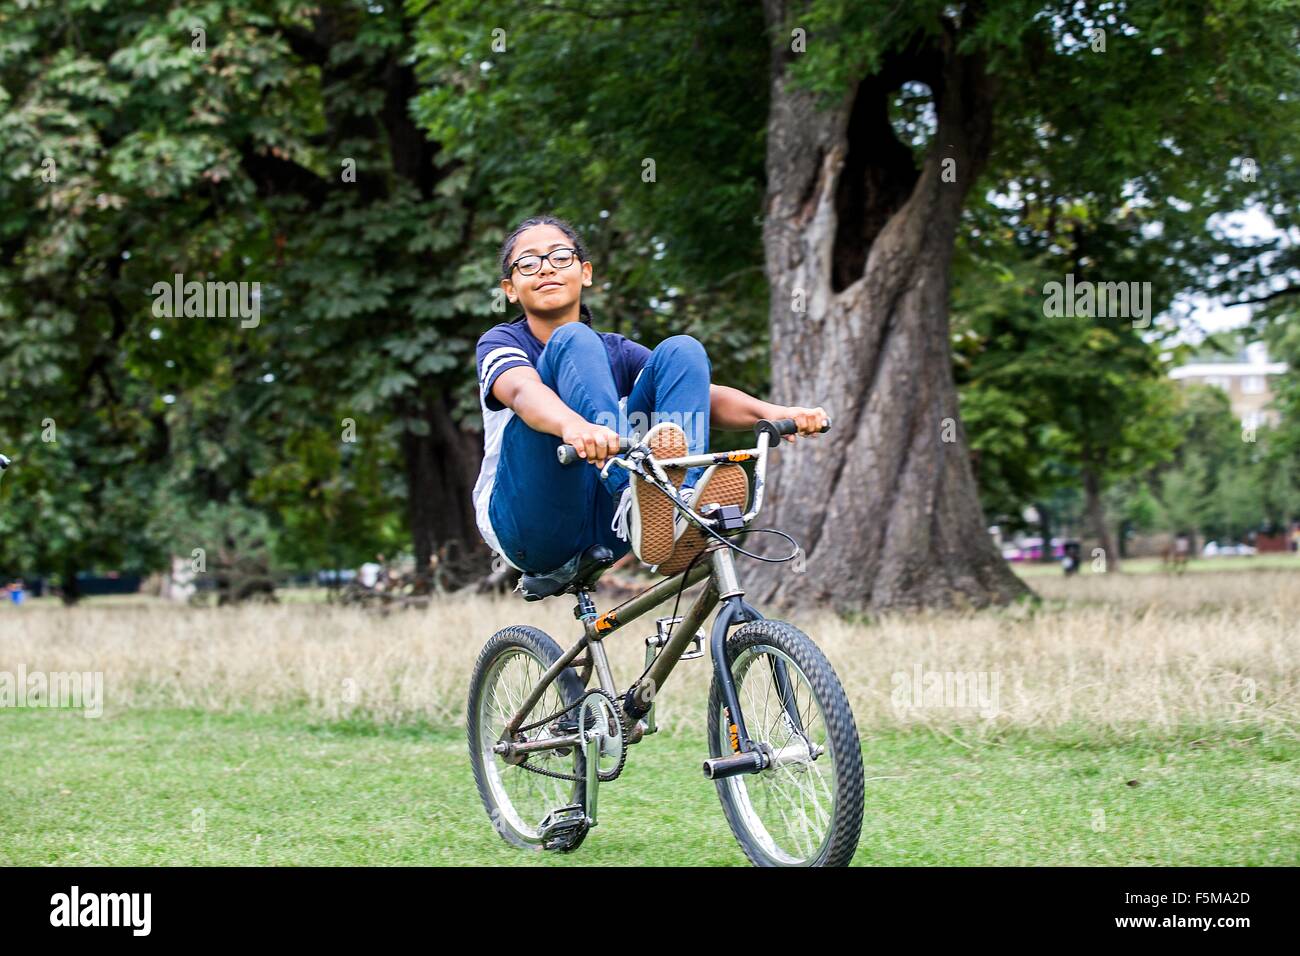 Boy riding BMX bicycle with feet up in park Stock Photo